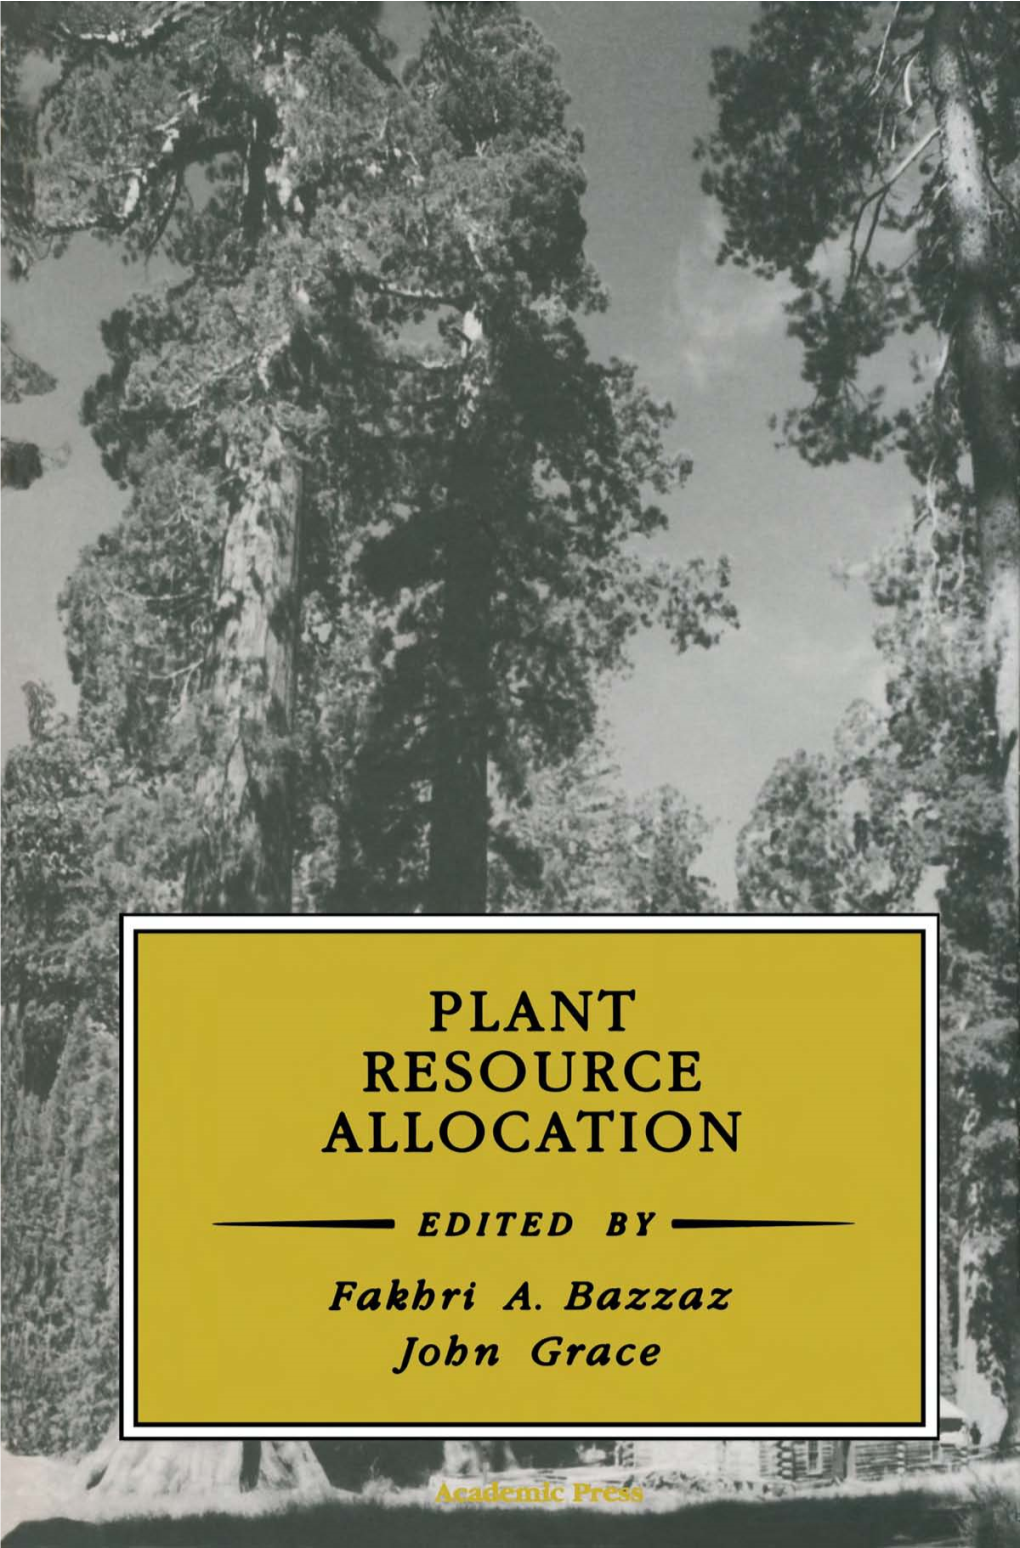 Plant Resource Allocation This Is a Volume in the PHYSIOLOGICAL ECOLOGY Series Edited by Harold A